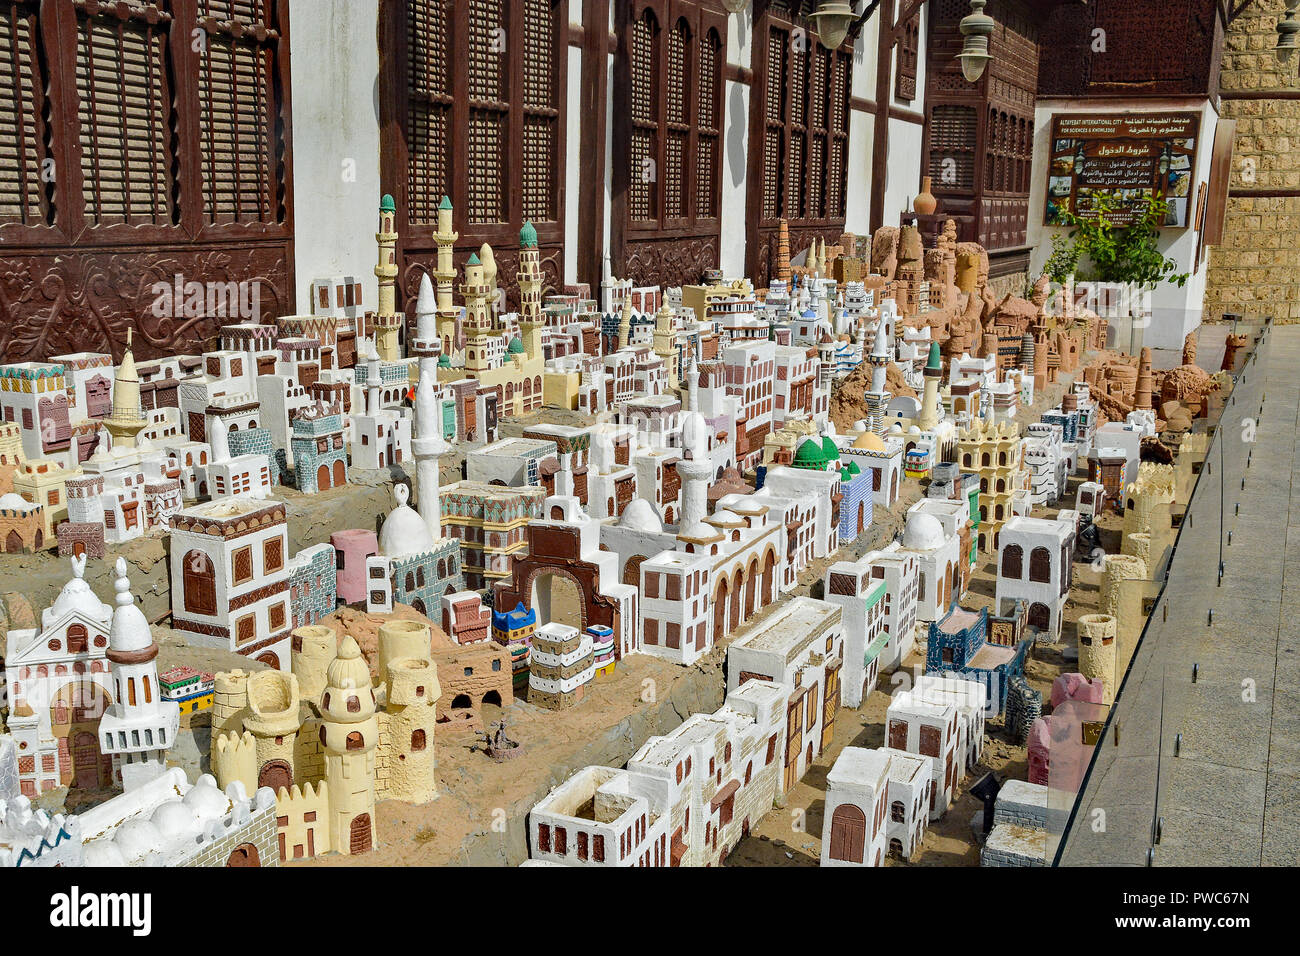 Model city made of sand outside of a cultural center in Jeddah, Saudi Arabia. Stock Photo